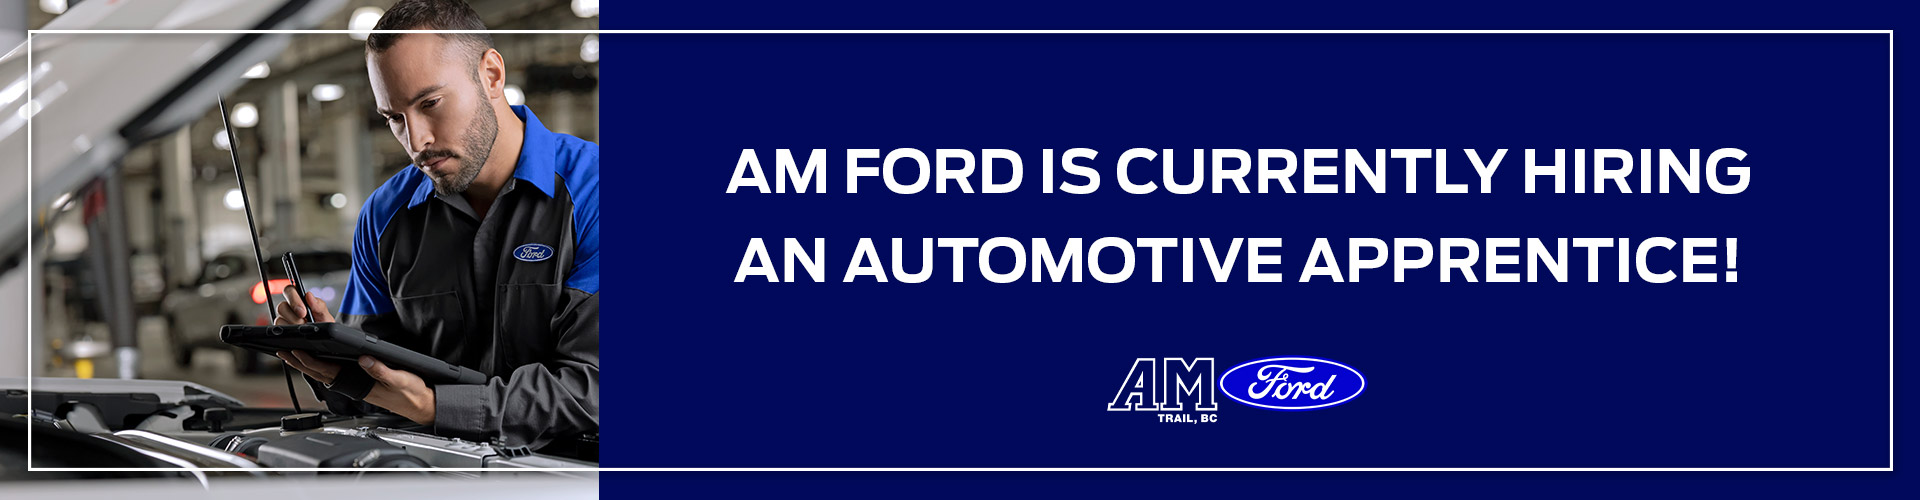 We're Hiring Automotive Apprentices | AM Ford | Trail, BC